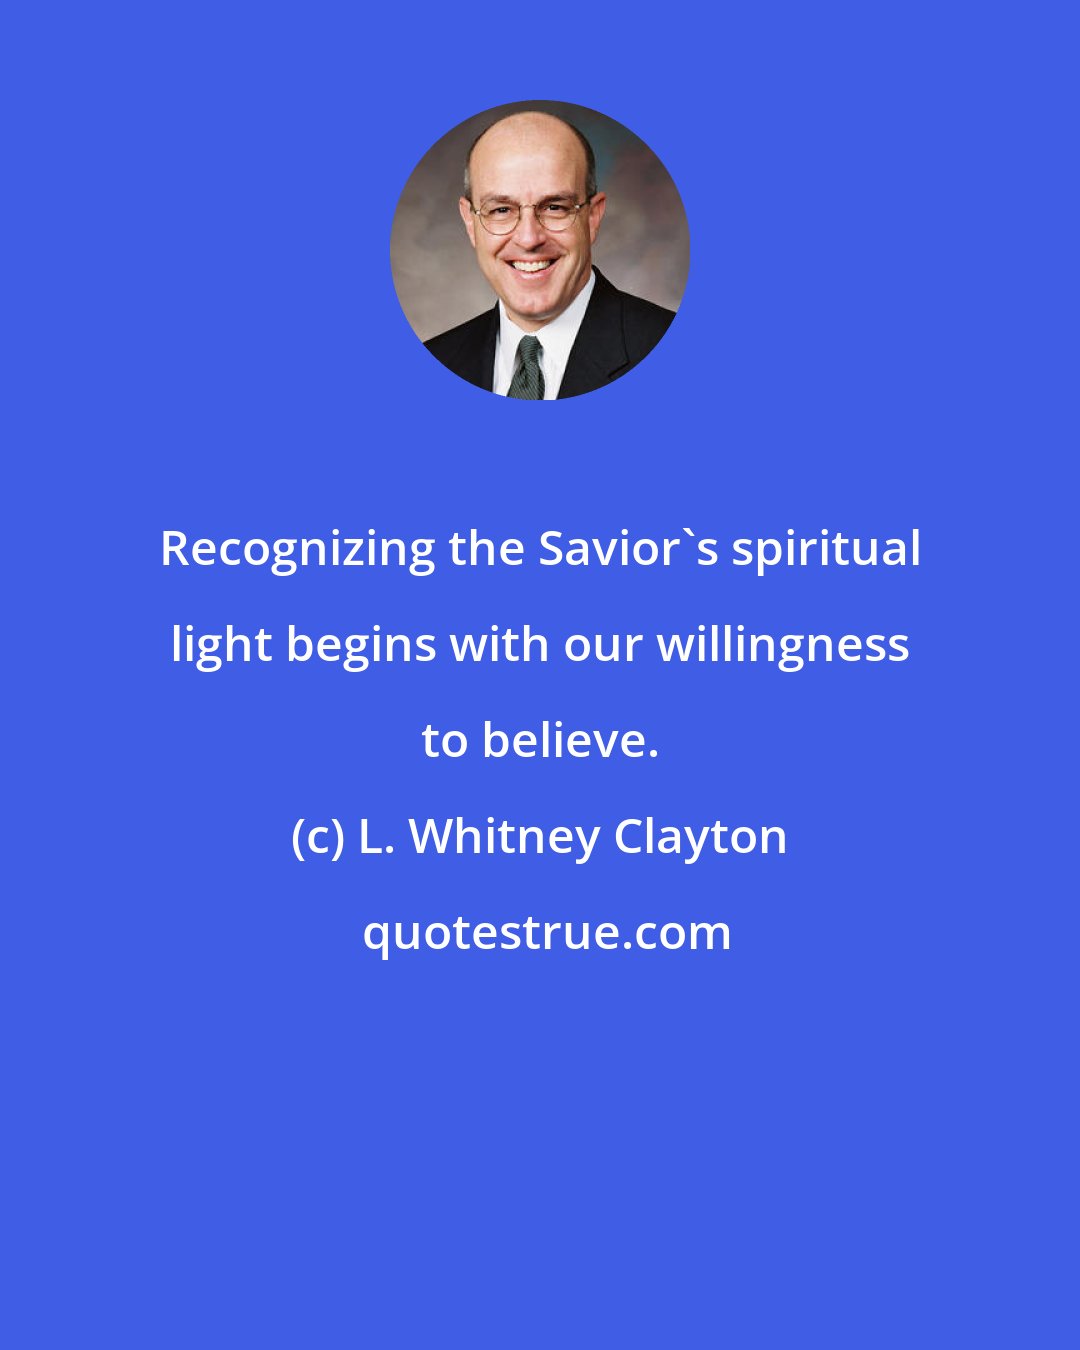 L. Whitney Clayton: Recognizing the Savior's spiritual light begins with our willingness to believe.